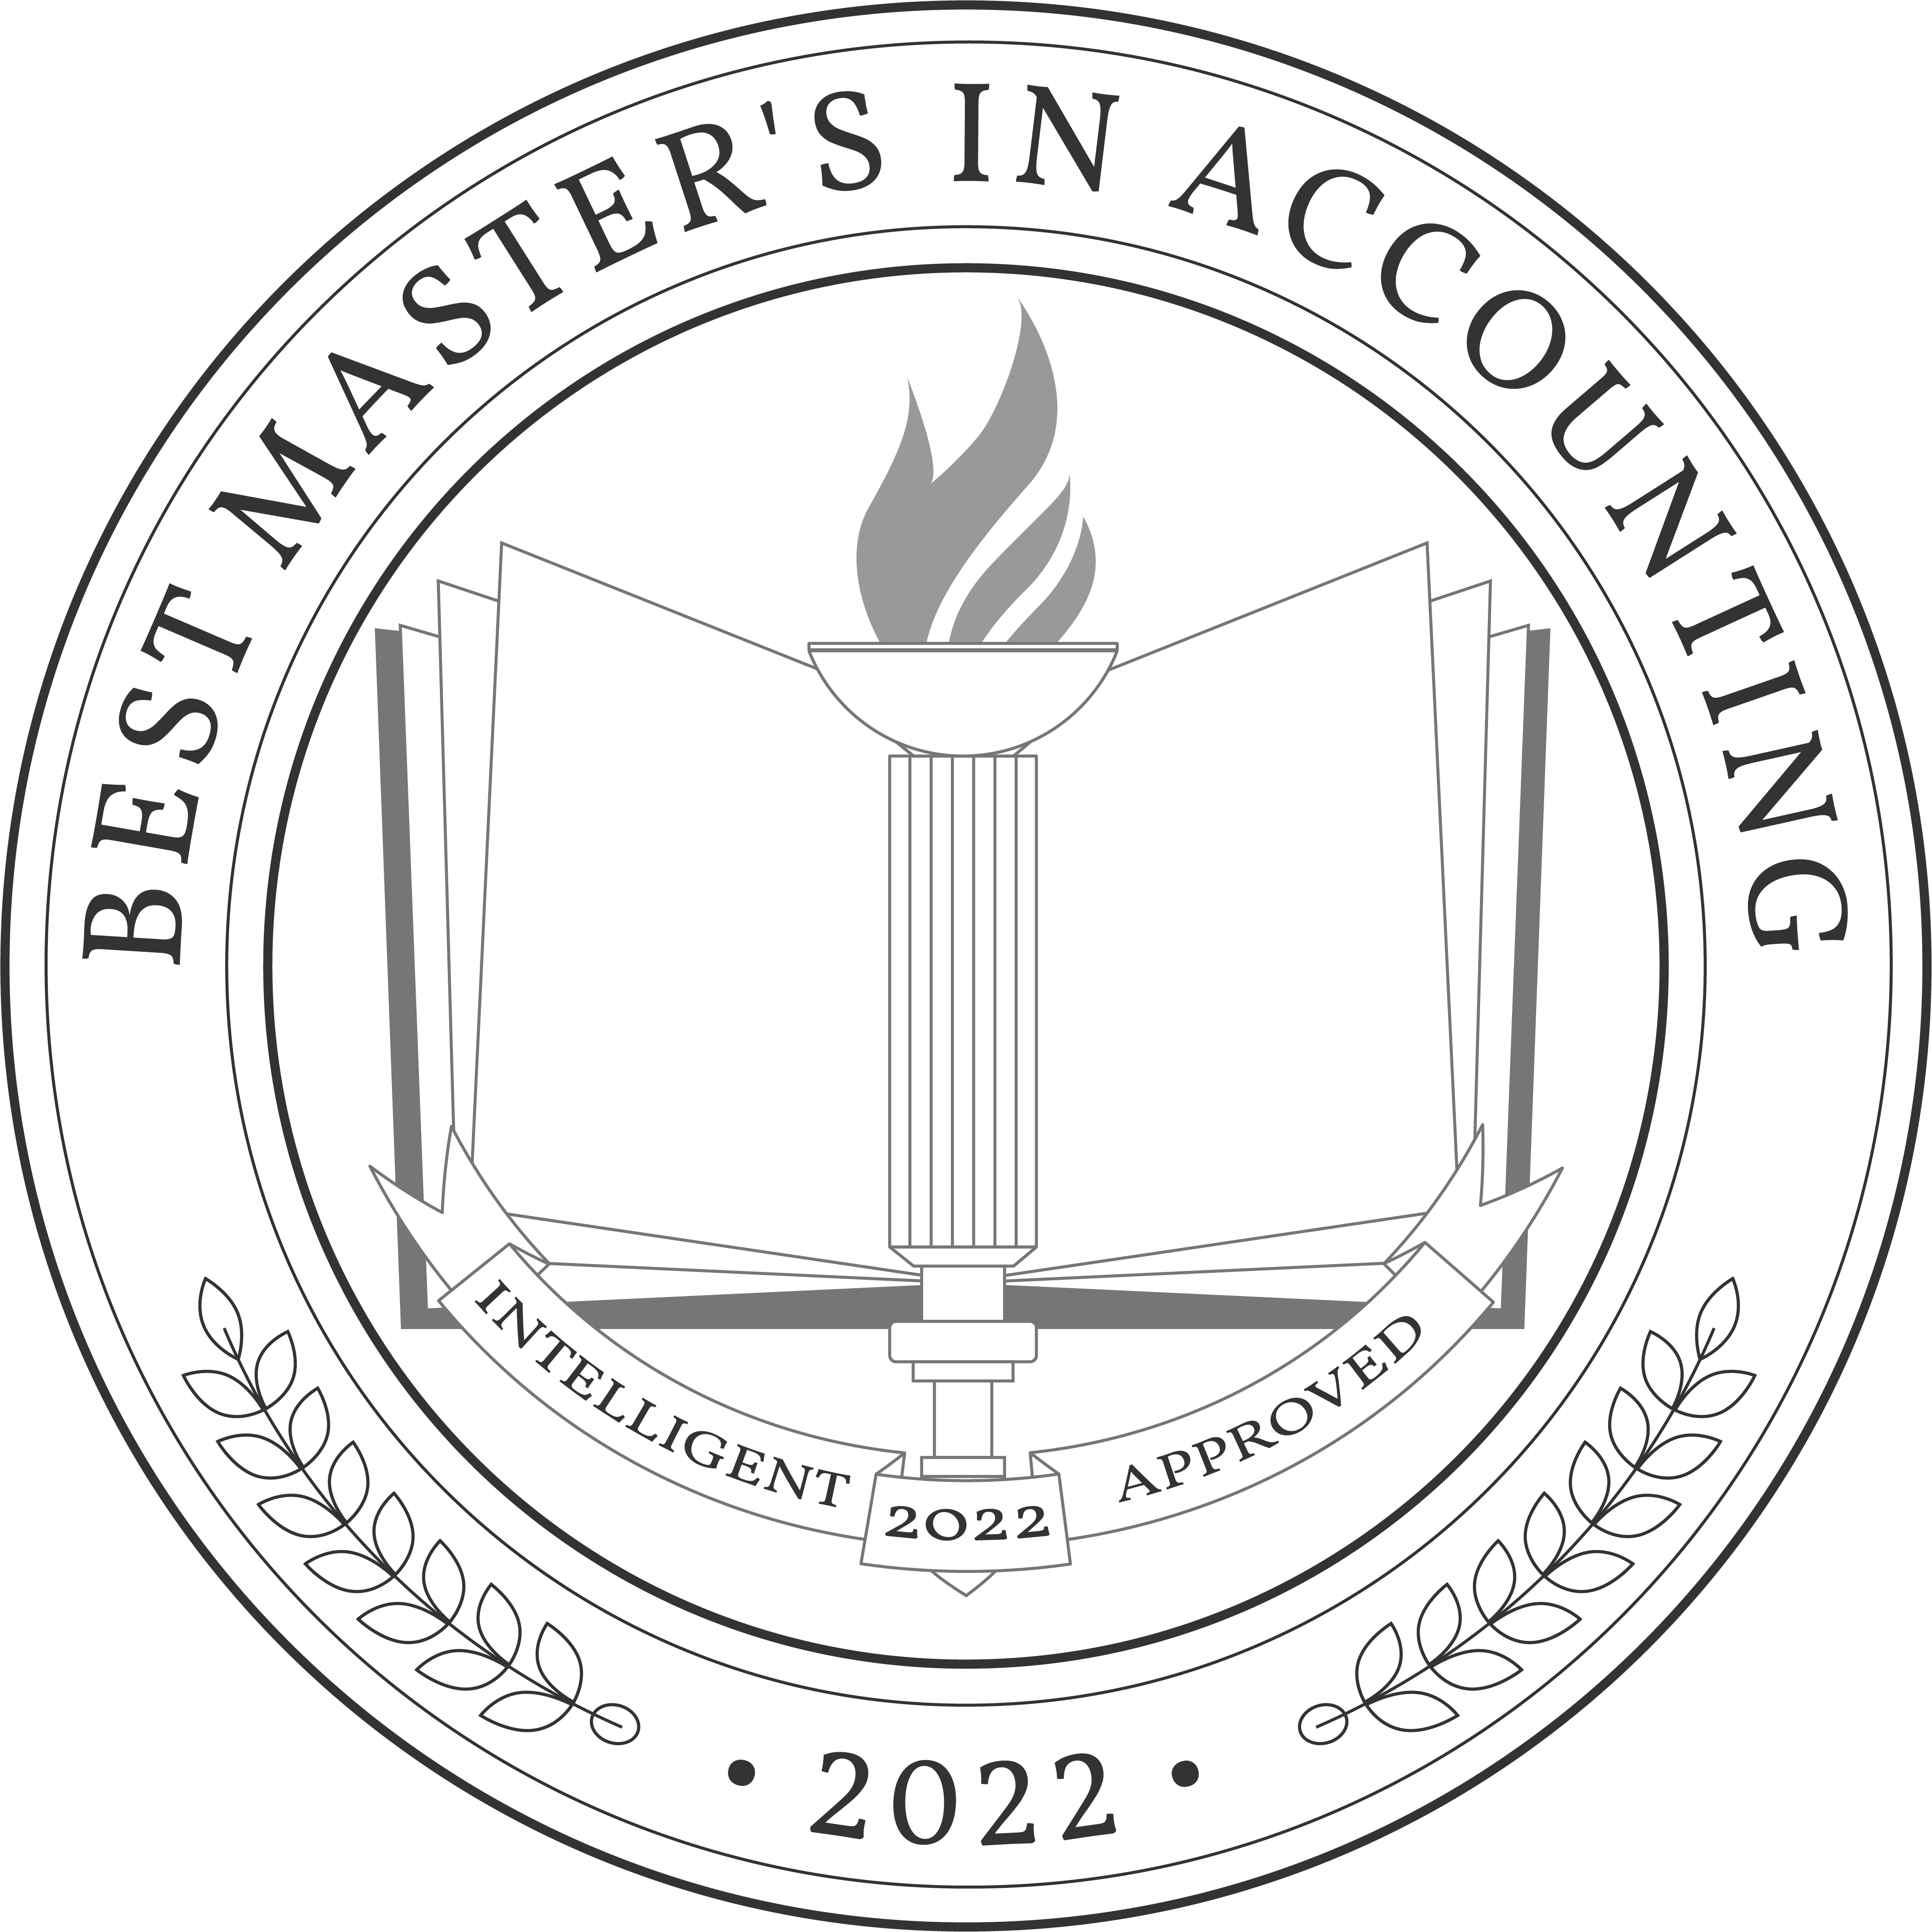 Best Master's in Accounting Badge